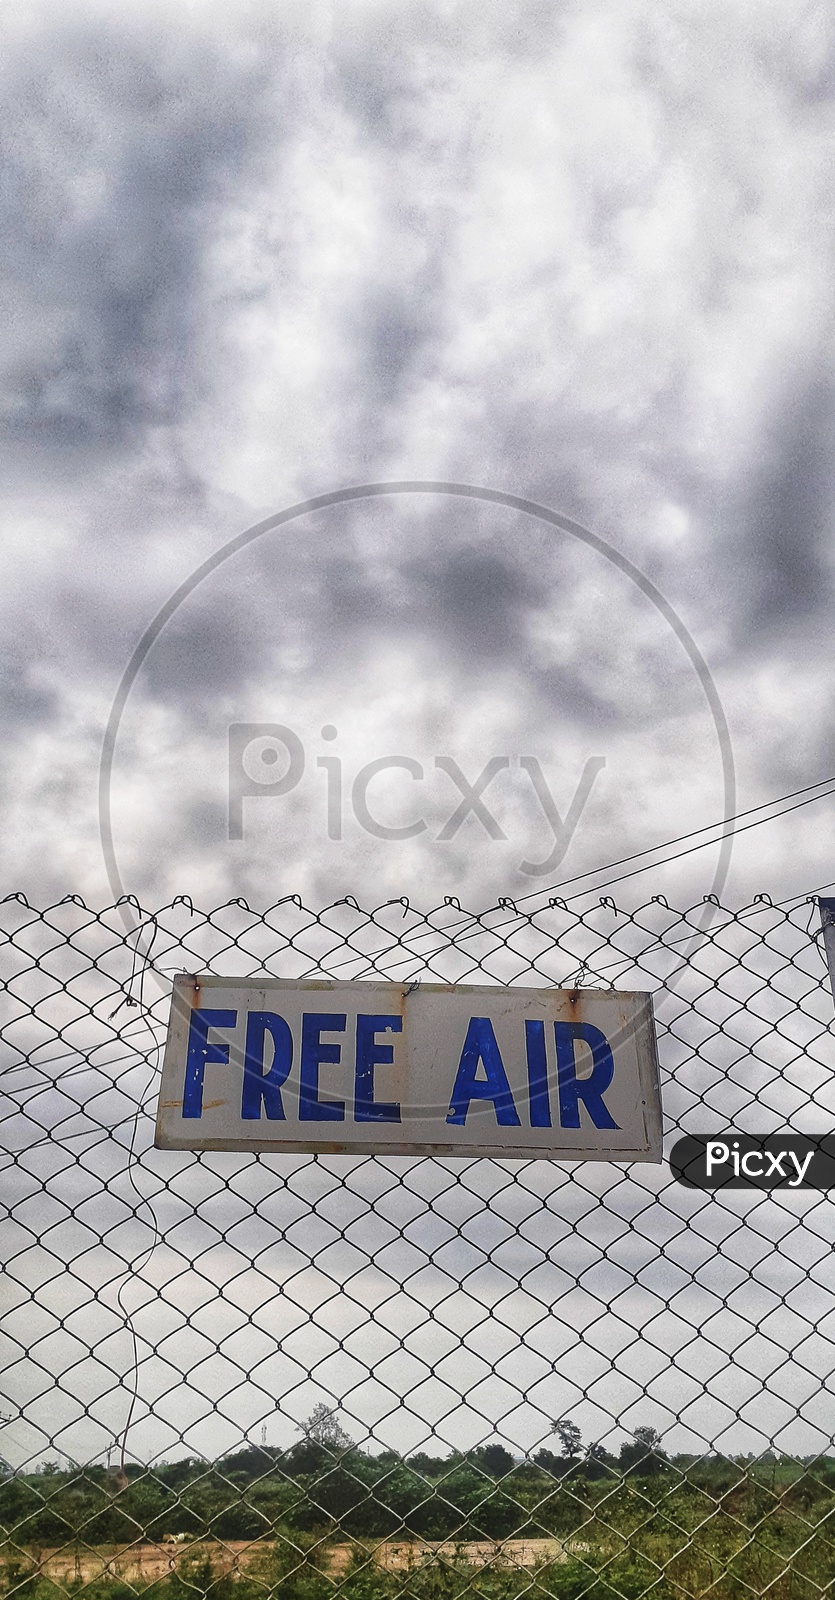 Free Air Name Board  Tagged To a Compound Fence